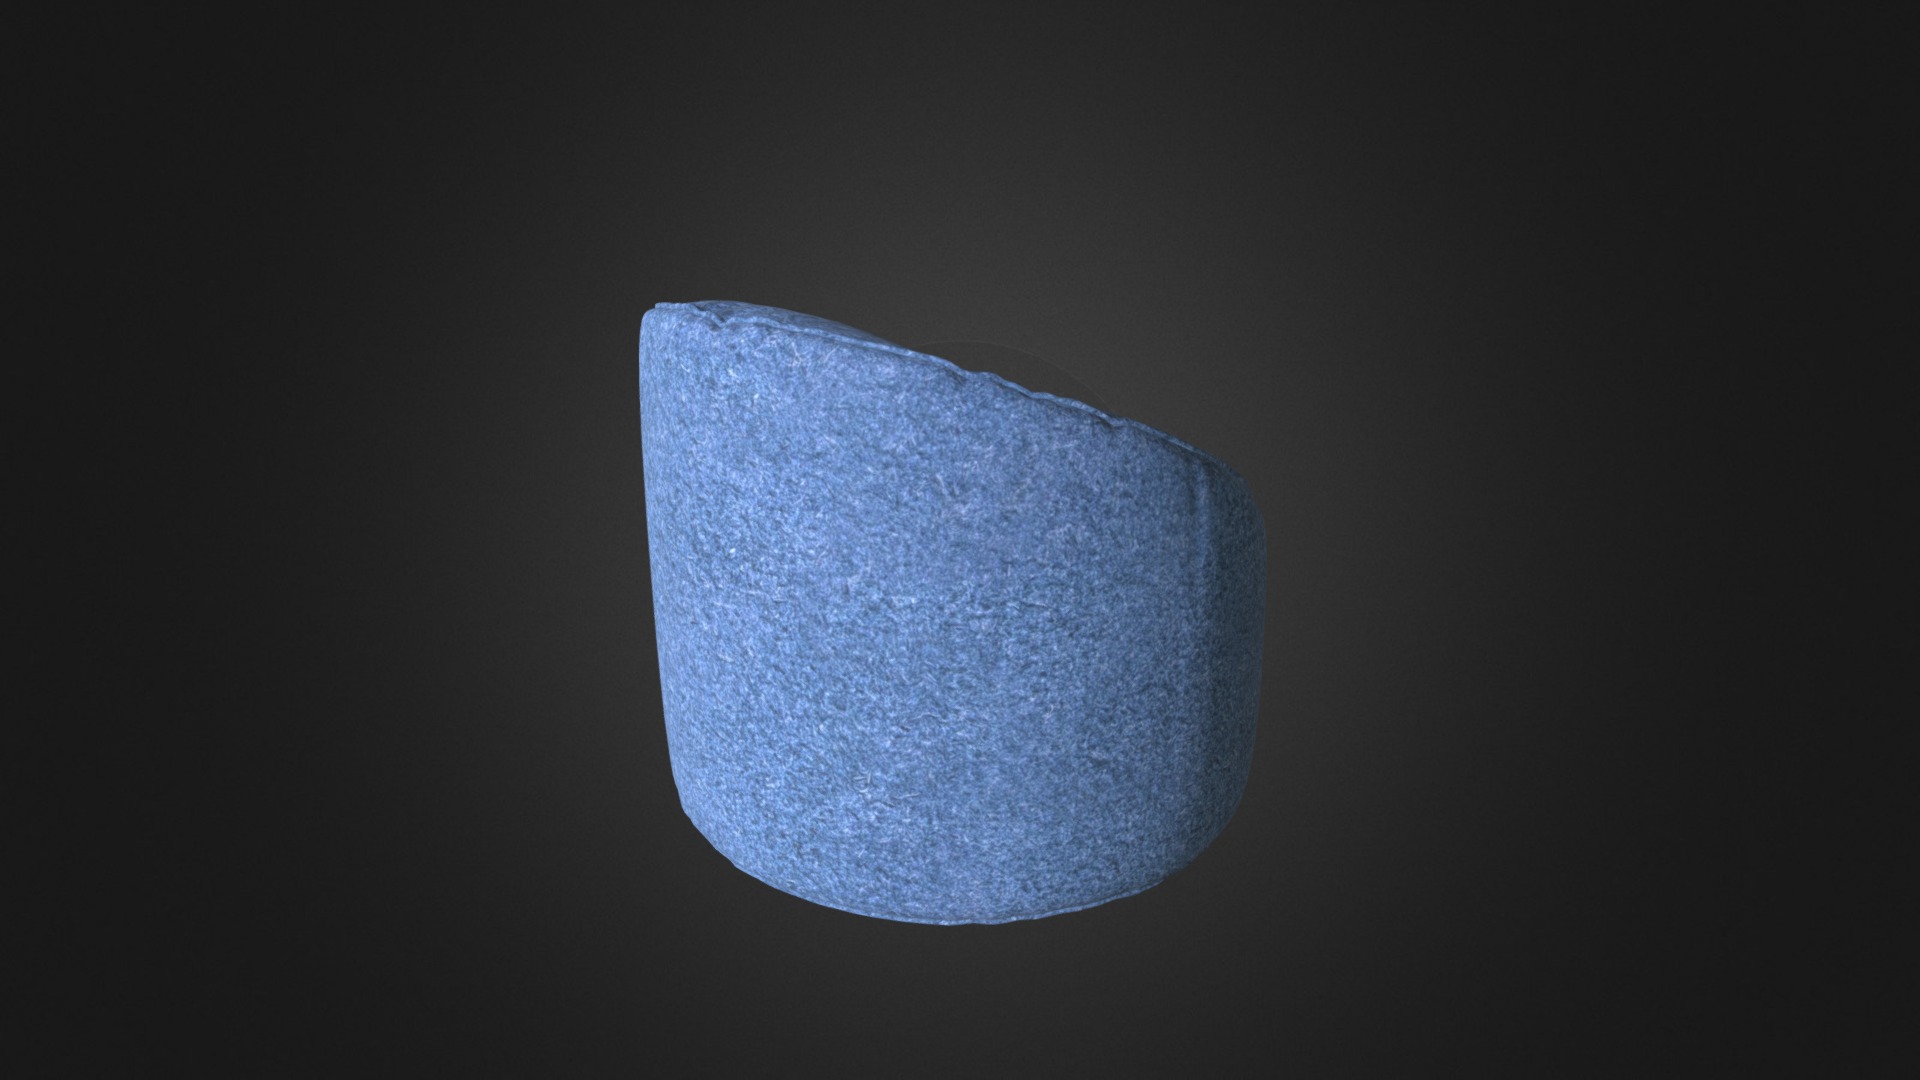 3D model armchair - This is a 3D model of the armchair. The 3D model is about a blue rock with a dark background.